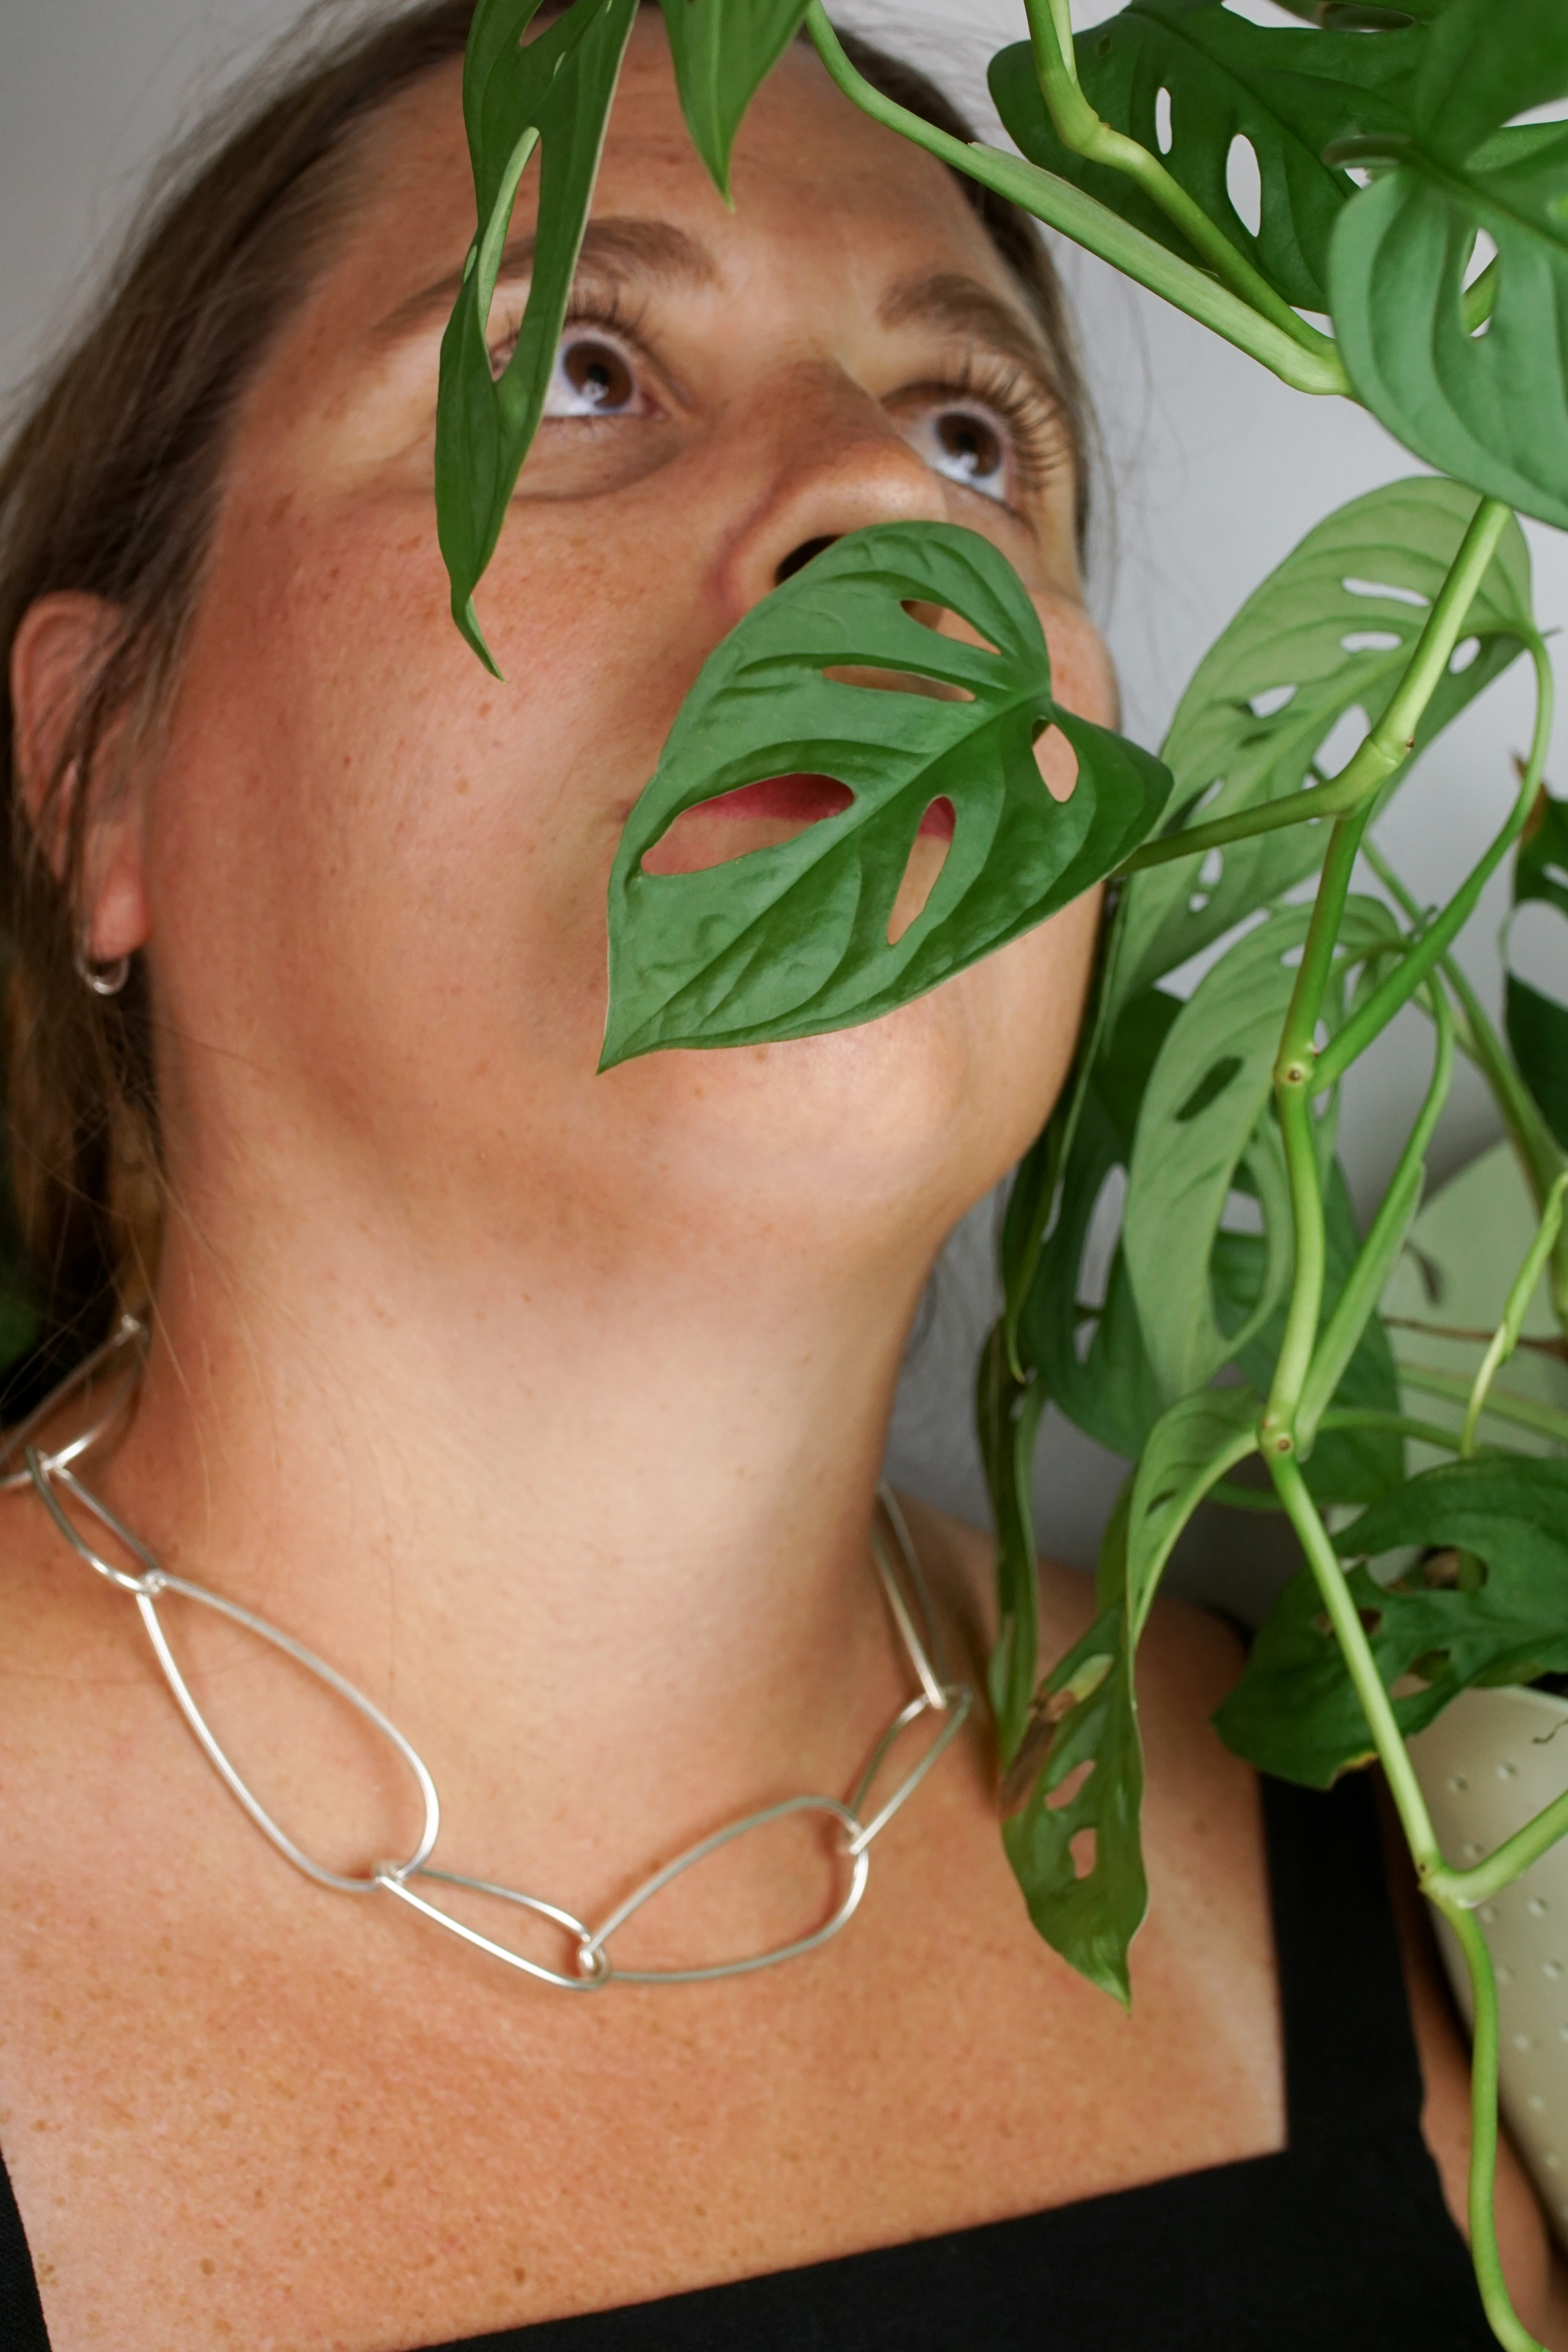 woman wearing silver chain necklace and standing next to monstera adonsonii house plant